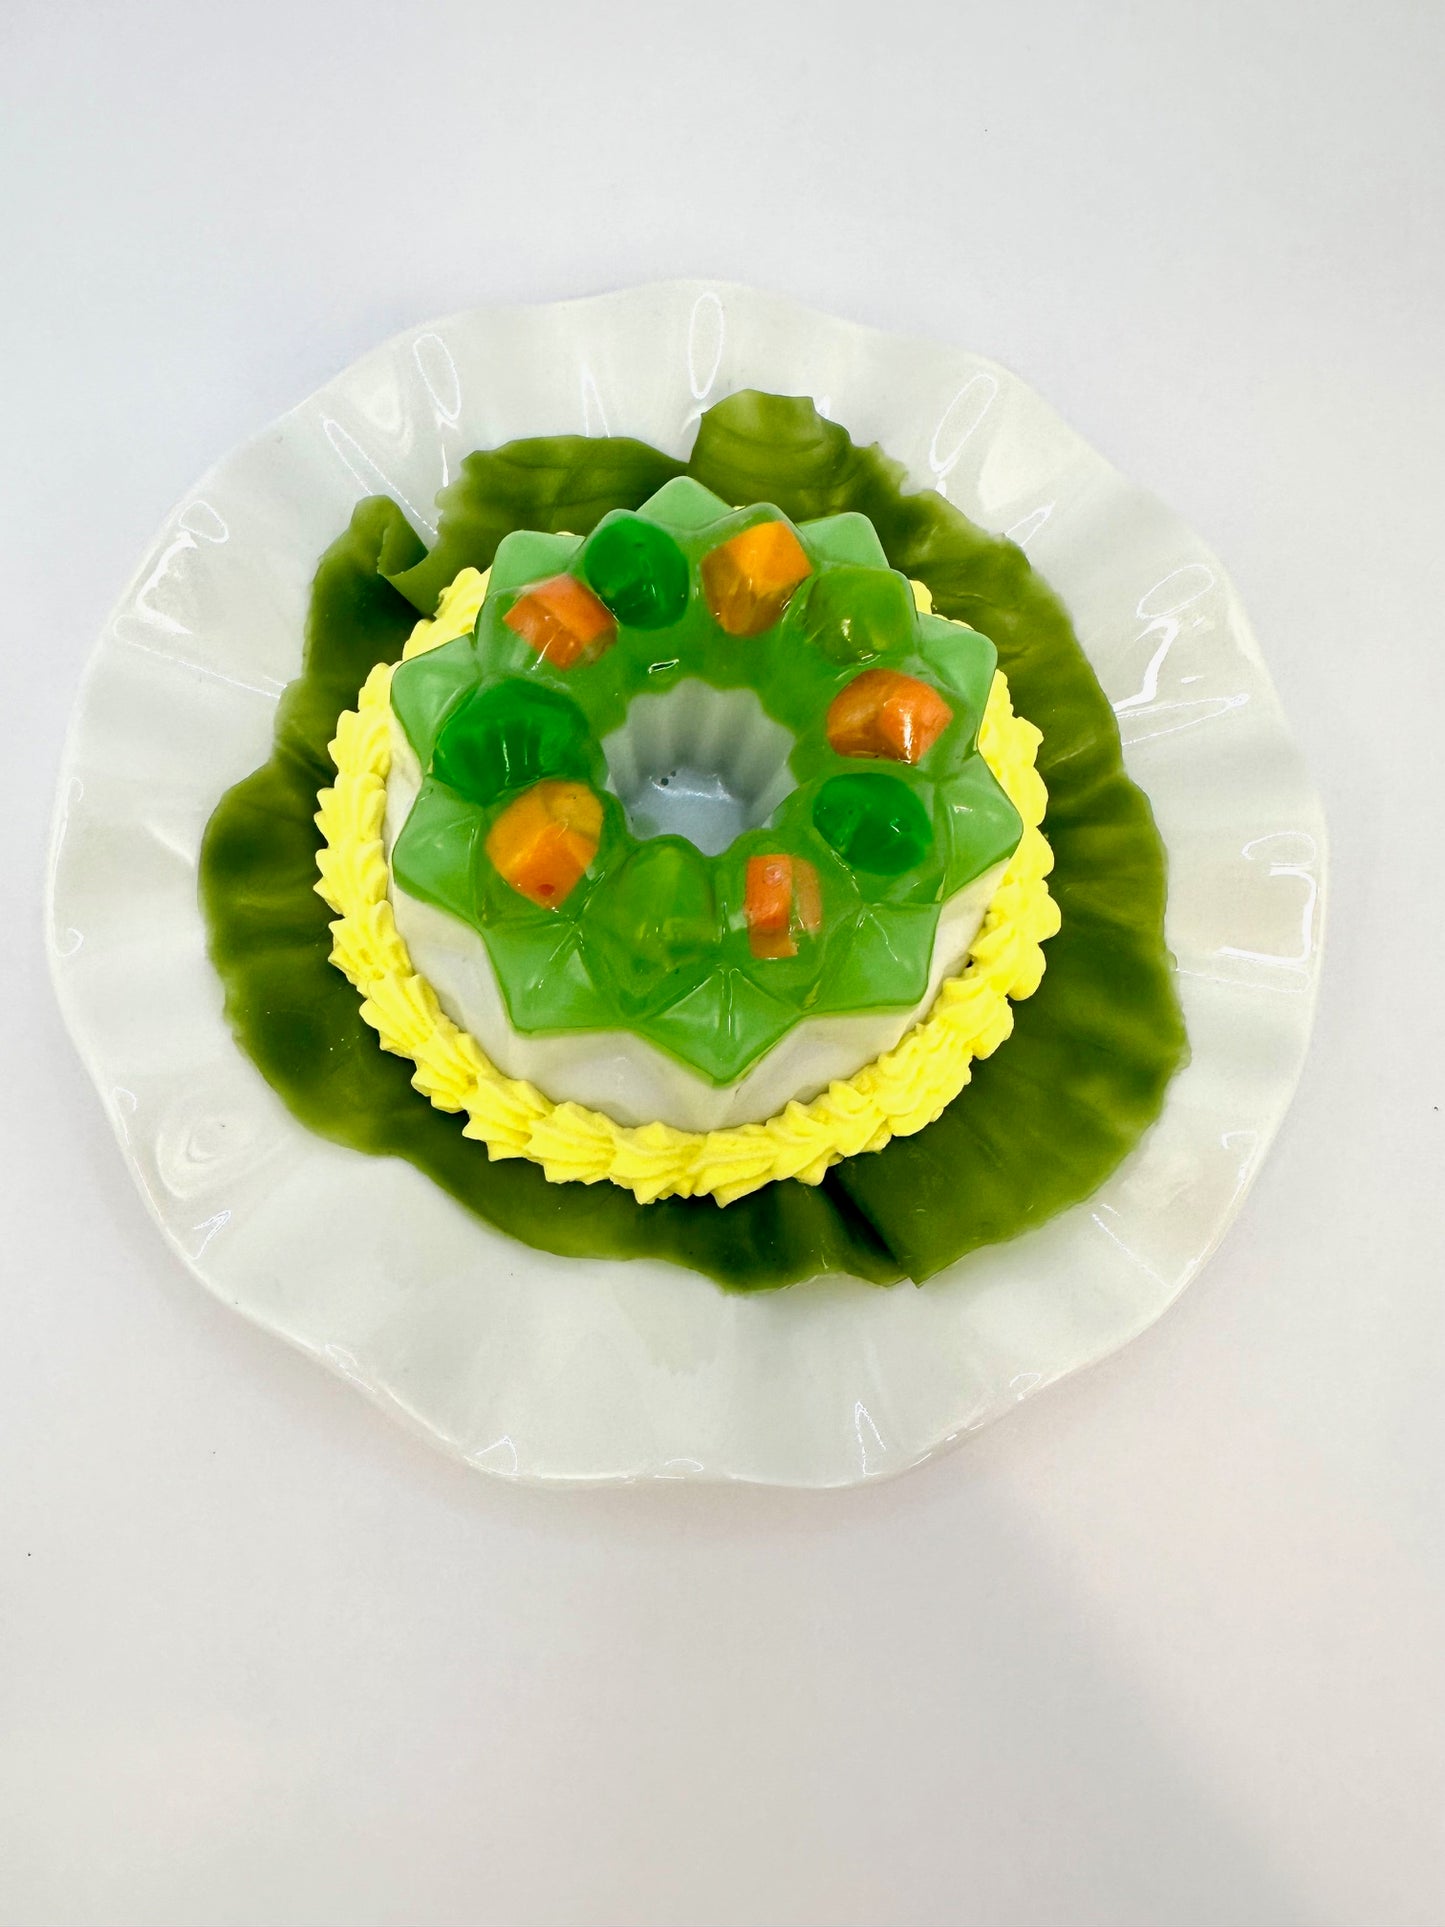 Small Peas and Carrots Jello in Vintage Plate and plastic lettuce